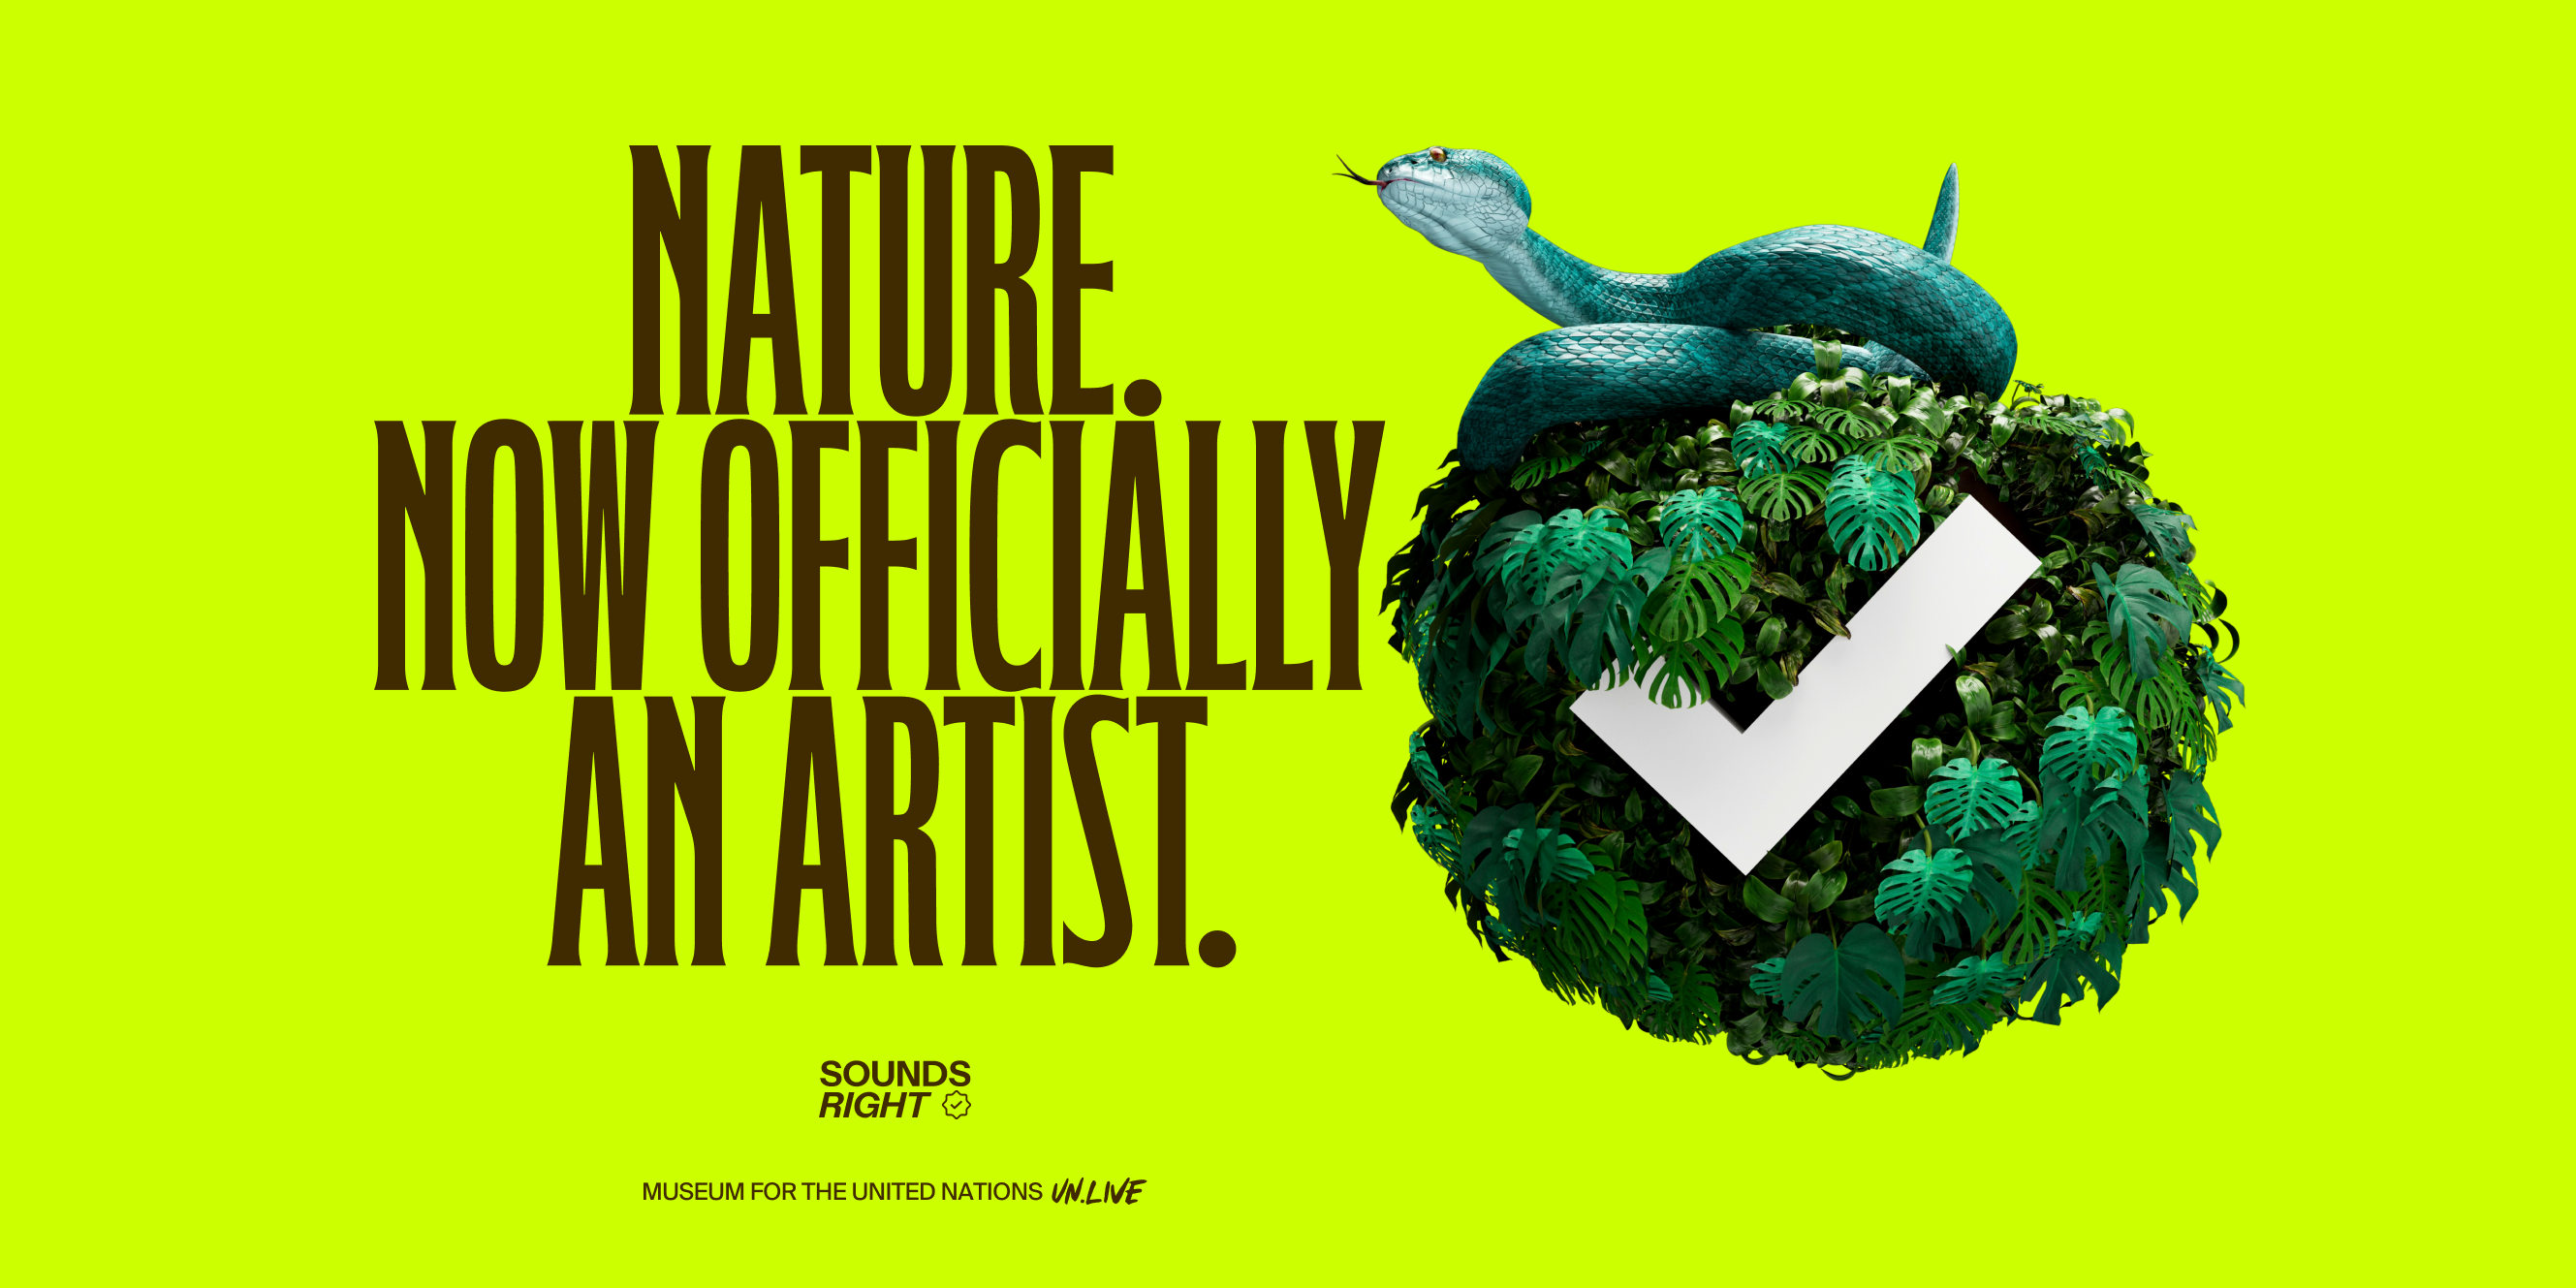 Sounds Right initiative will recognize NATURE as an official artist.